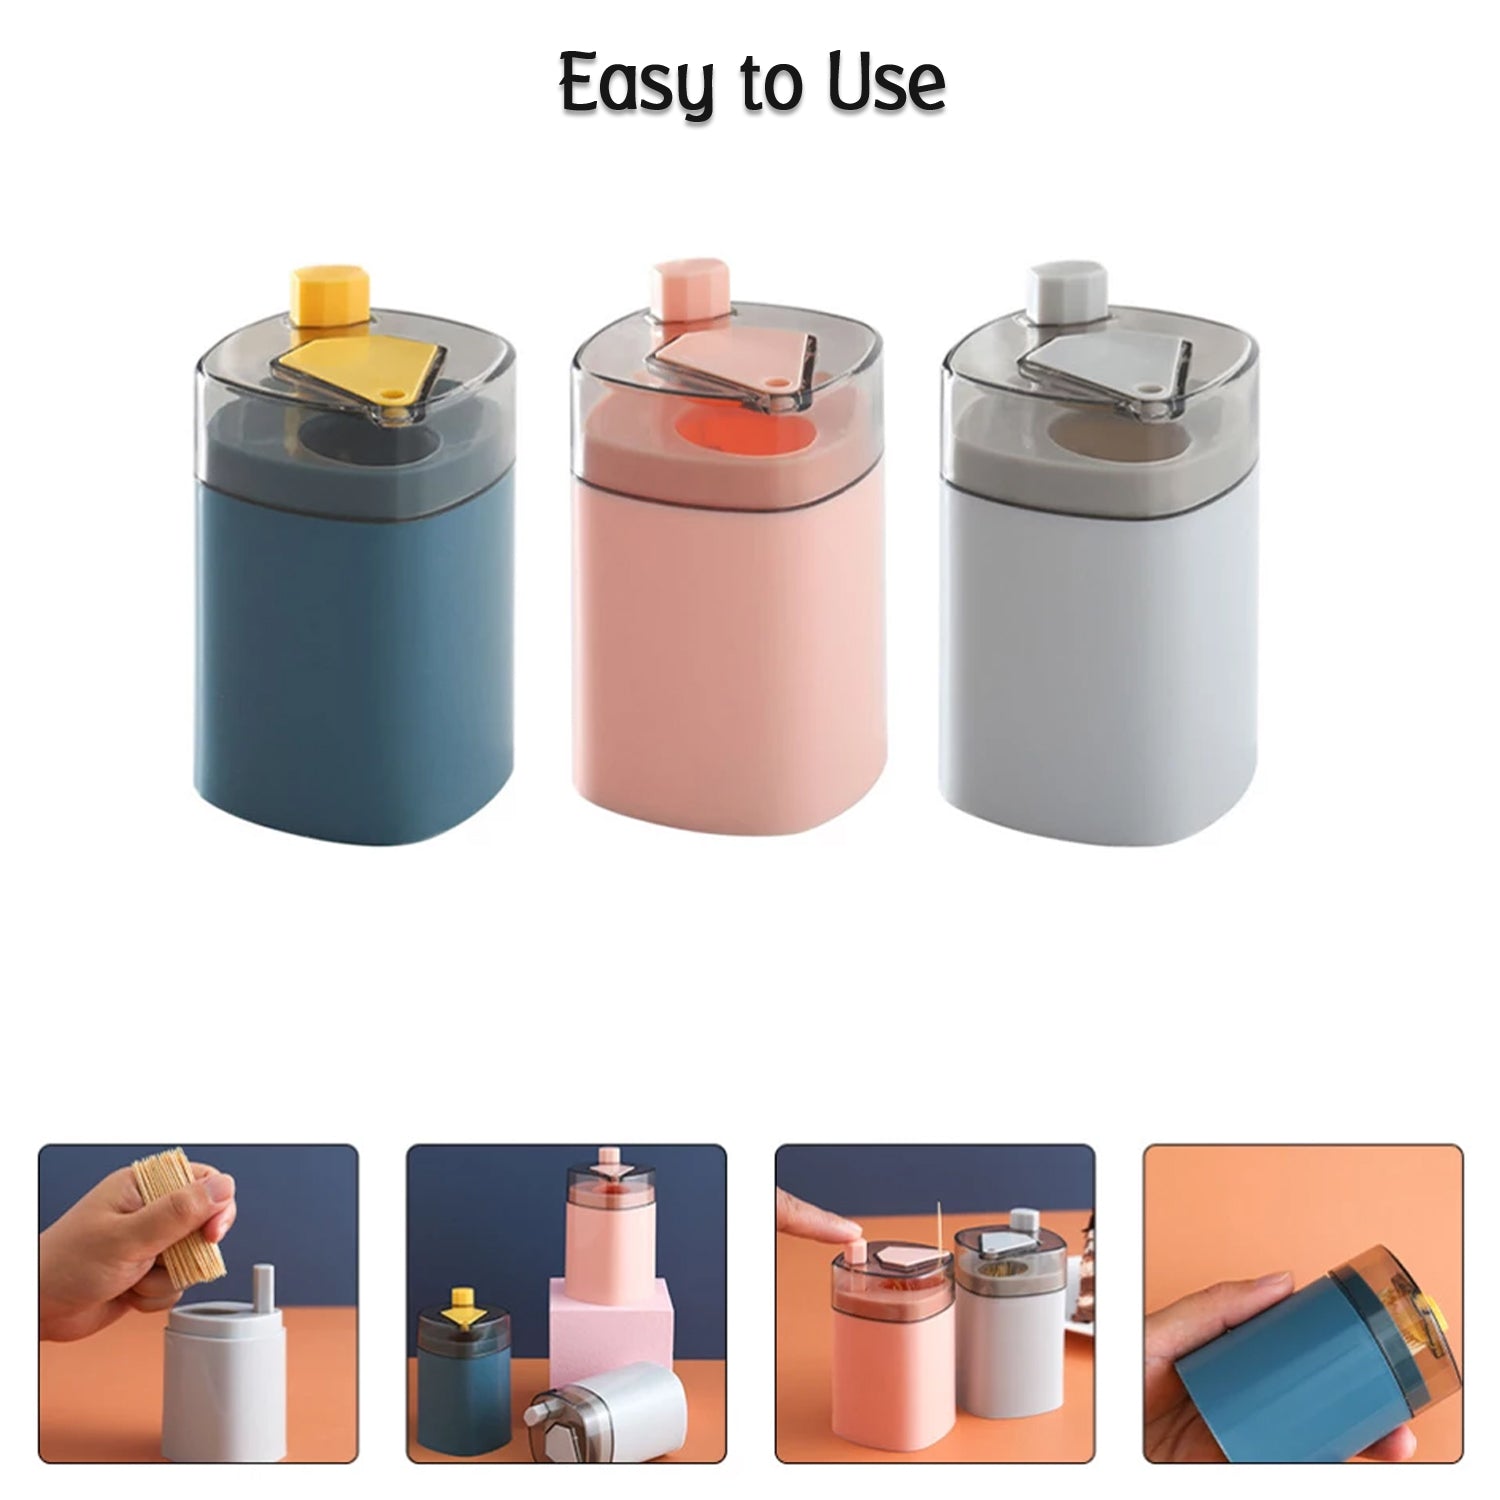 4005L Toothpick Holder Dispenser, Pop-Up Automatic Toothpick Dispenser for Kitchen Restaurant Thickening Toothpicks Container Pocket Novelty, Safe Container Toothpick Storage Box.